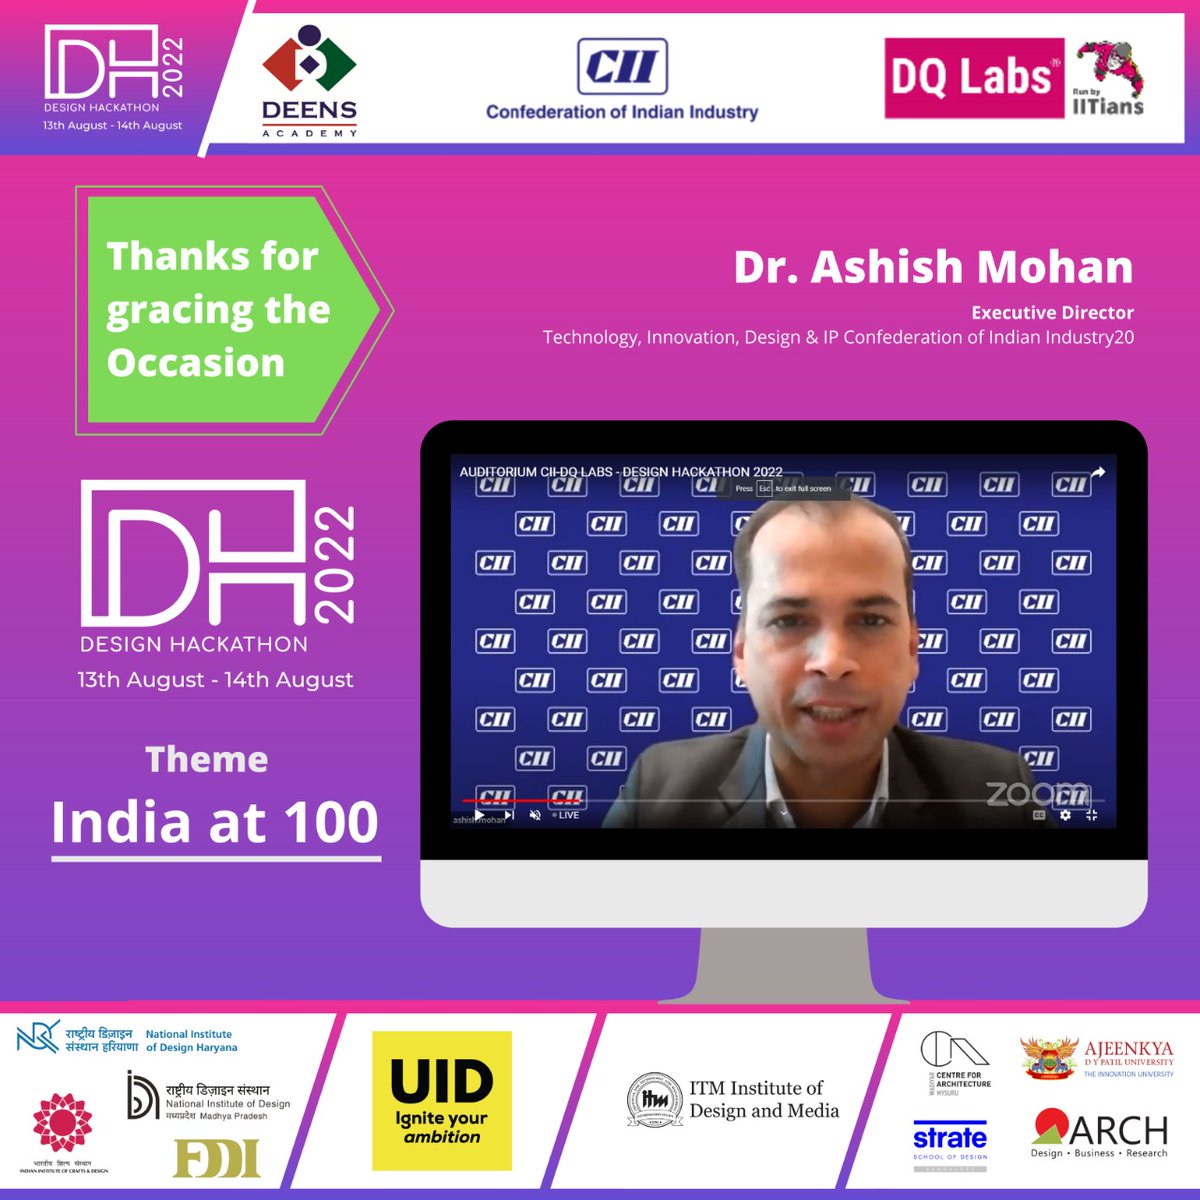 'Design thinking is important for India to realize its dream and aspirations in coming decades' ~ Dr. Ashish Mohan, Executive Director, Technology, Innovation, Design & IP in @FollowCII at the CII Design Hackathon 2022 hosted by CII and DQ Labs. @pradyumnavyas2 , @DrAshishMohan